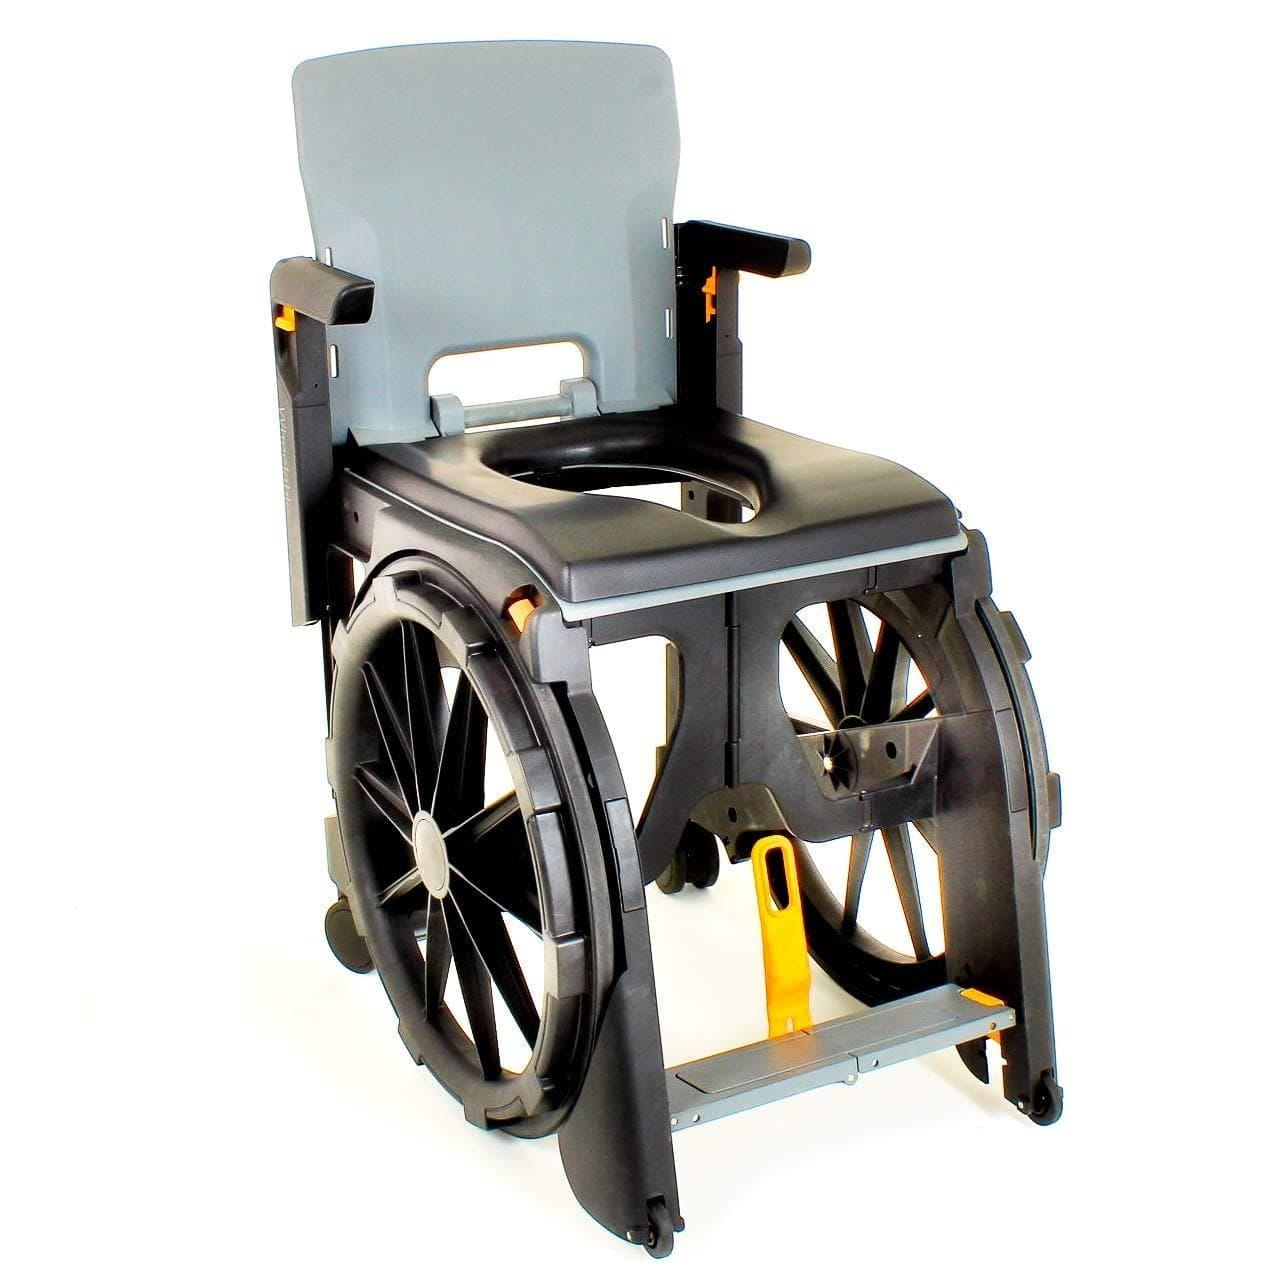 portable shower chair for travel by Seatara brand